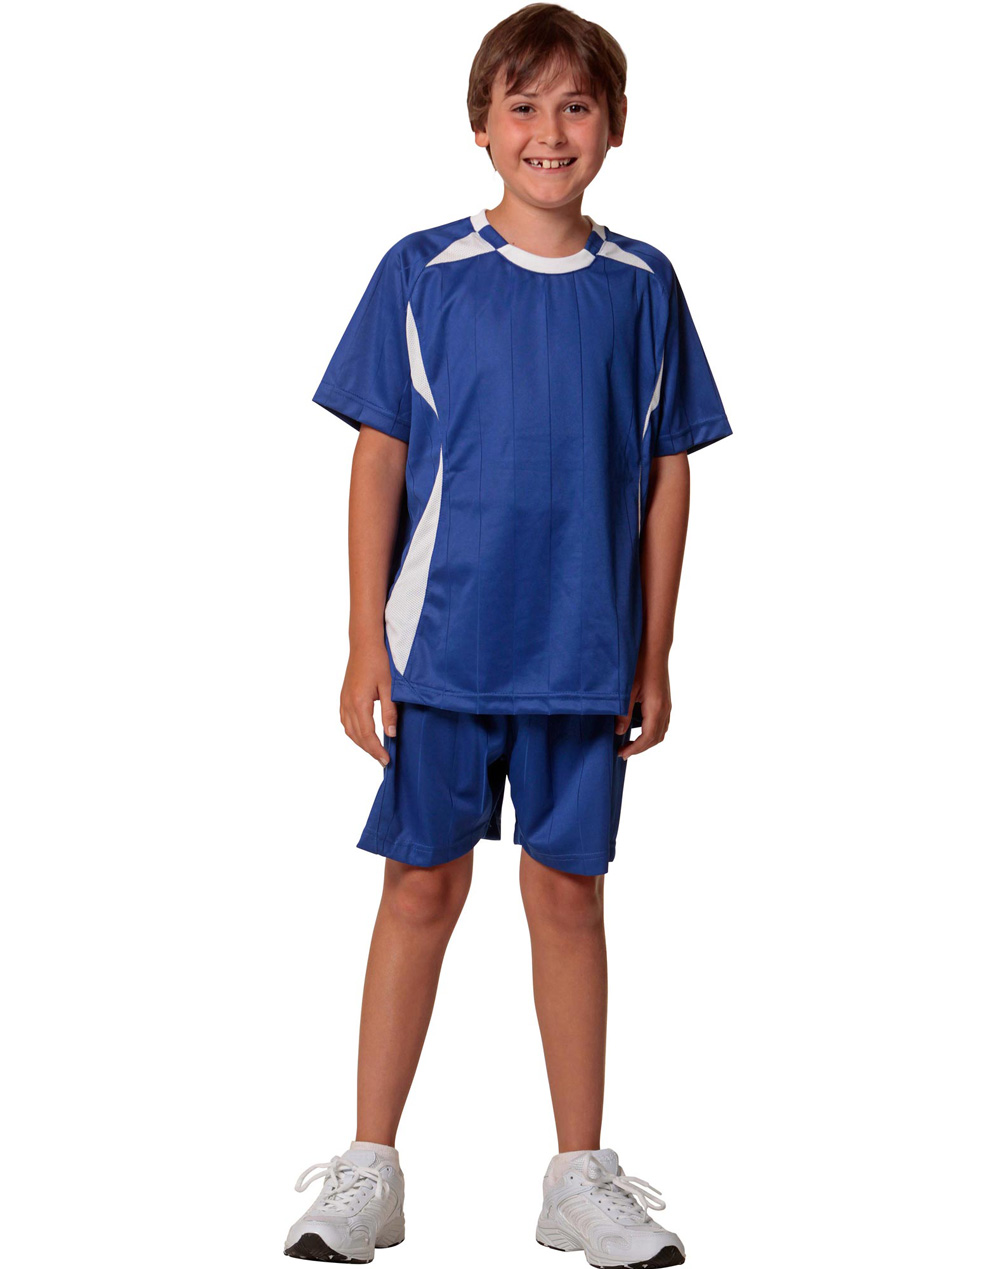 youth small soccer jersey